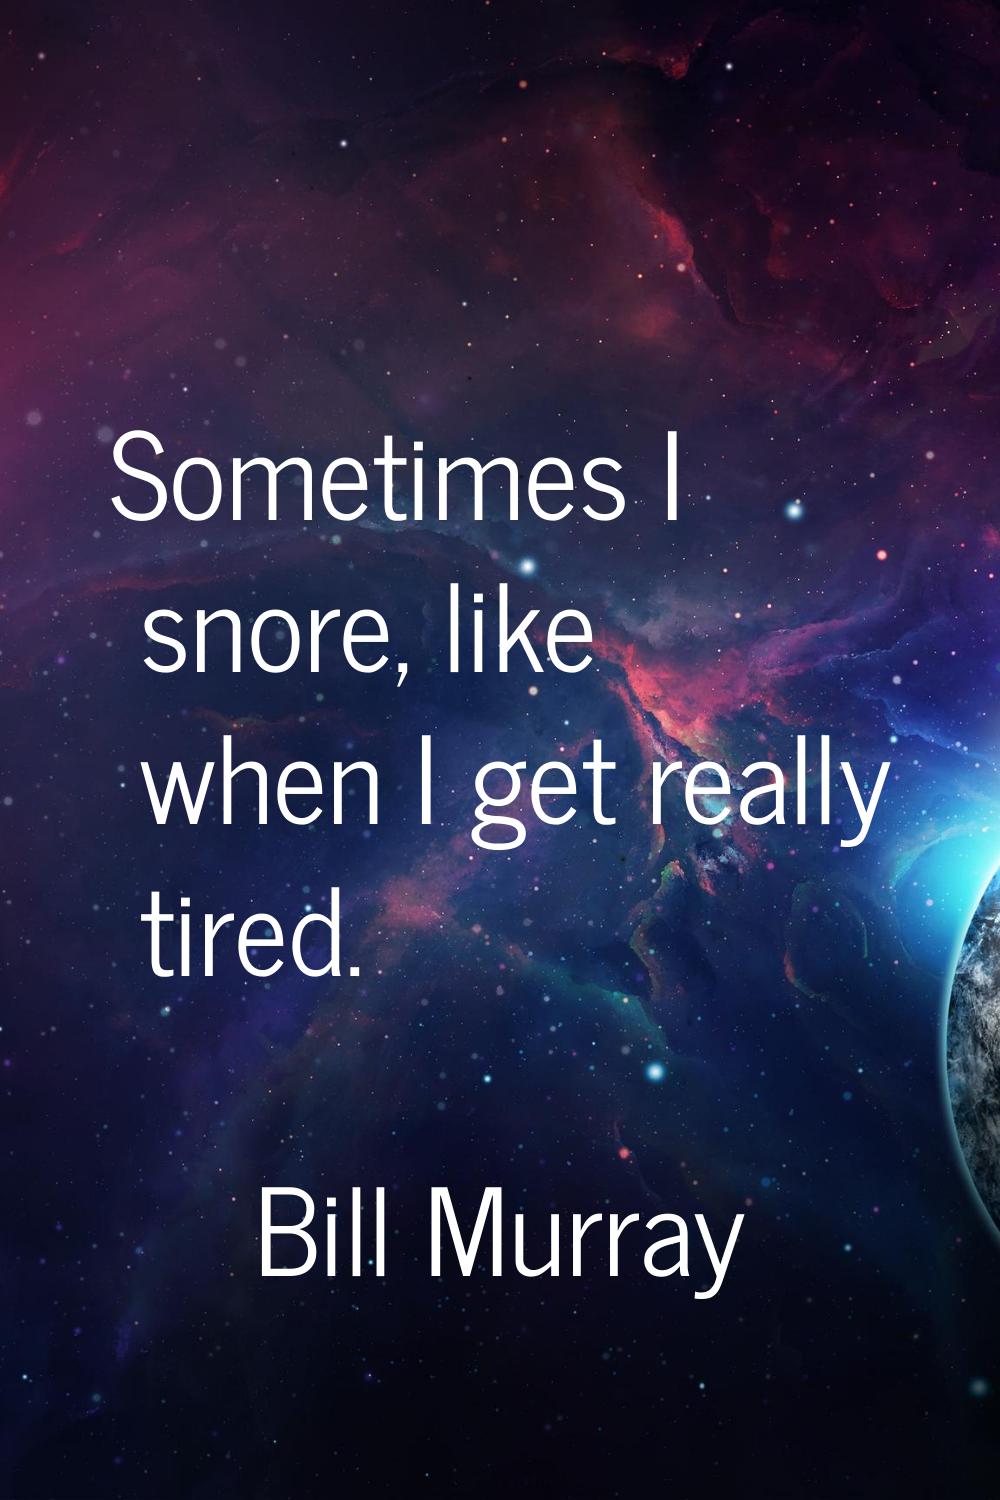 Sometimes I snore, like when I get really tired.